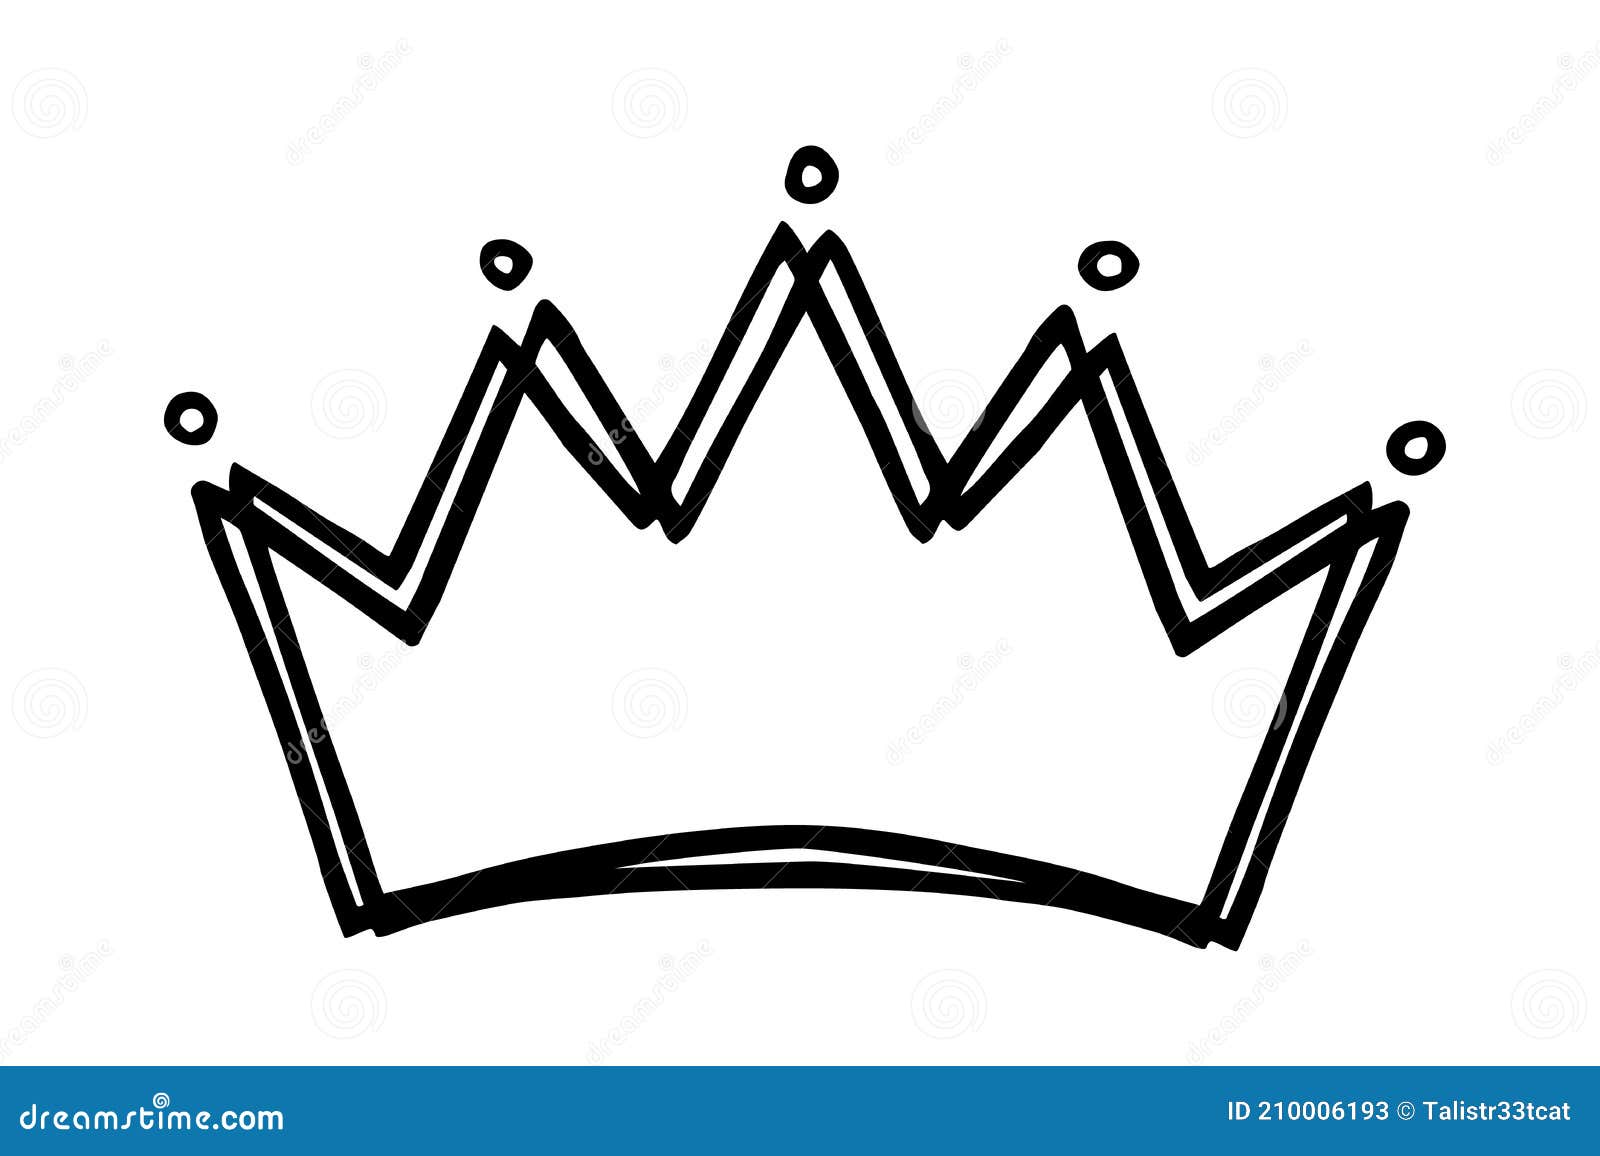 Hand Drawn Stylized Crown Design Hand Painted with Ink Pen Stock Vector ...